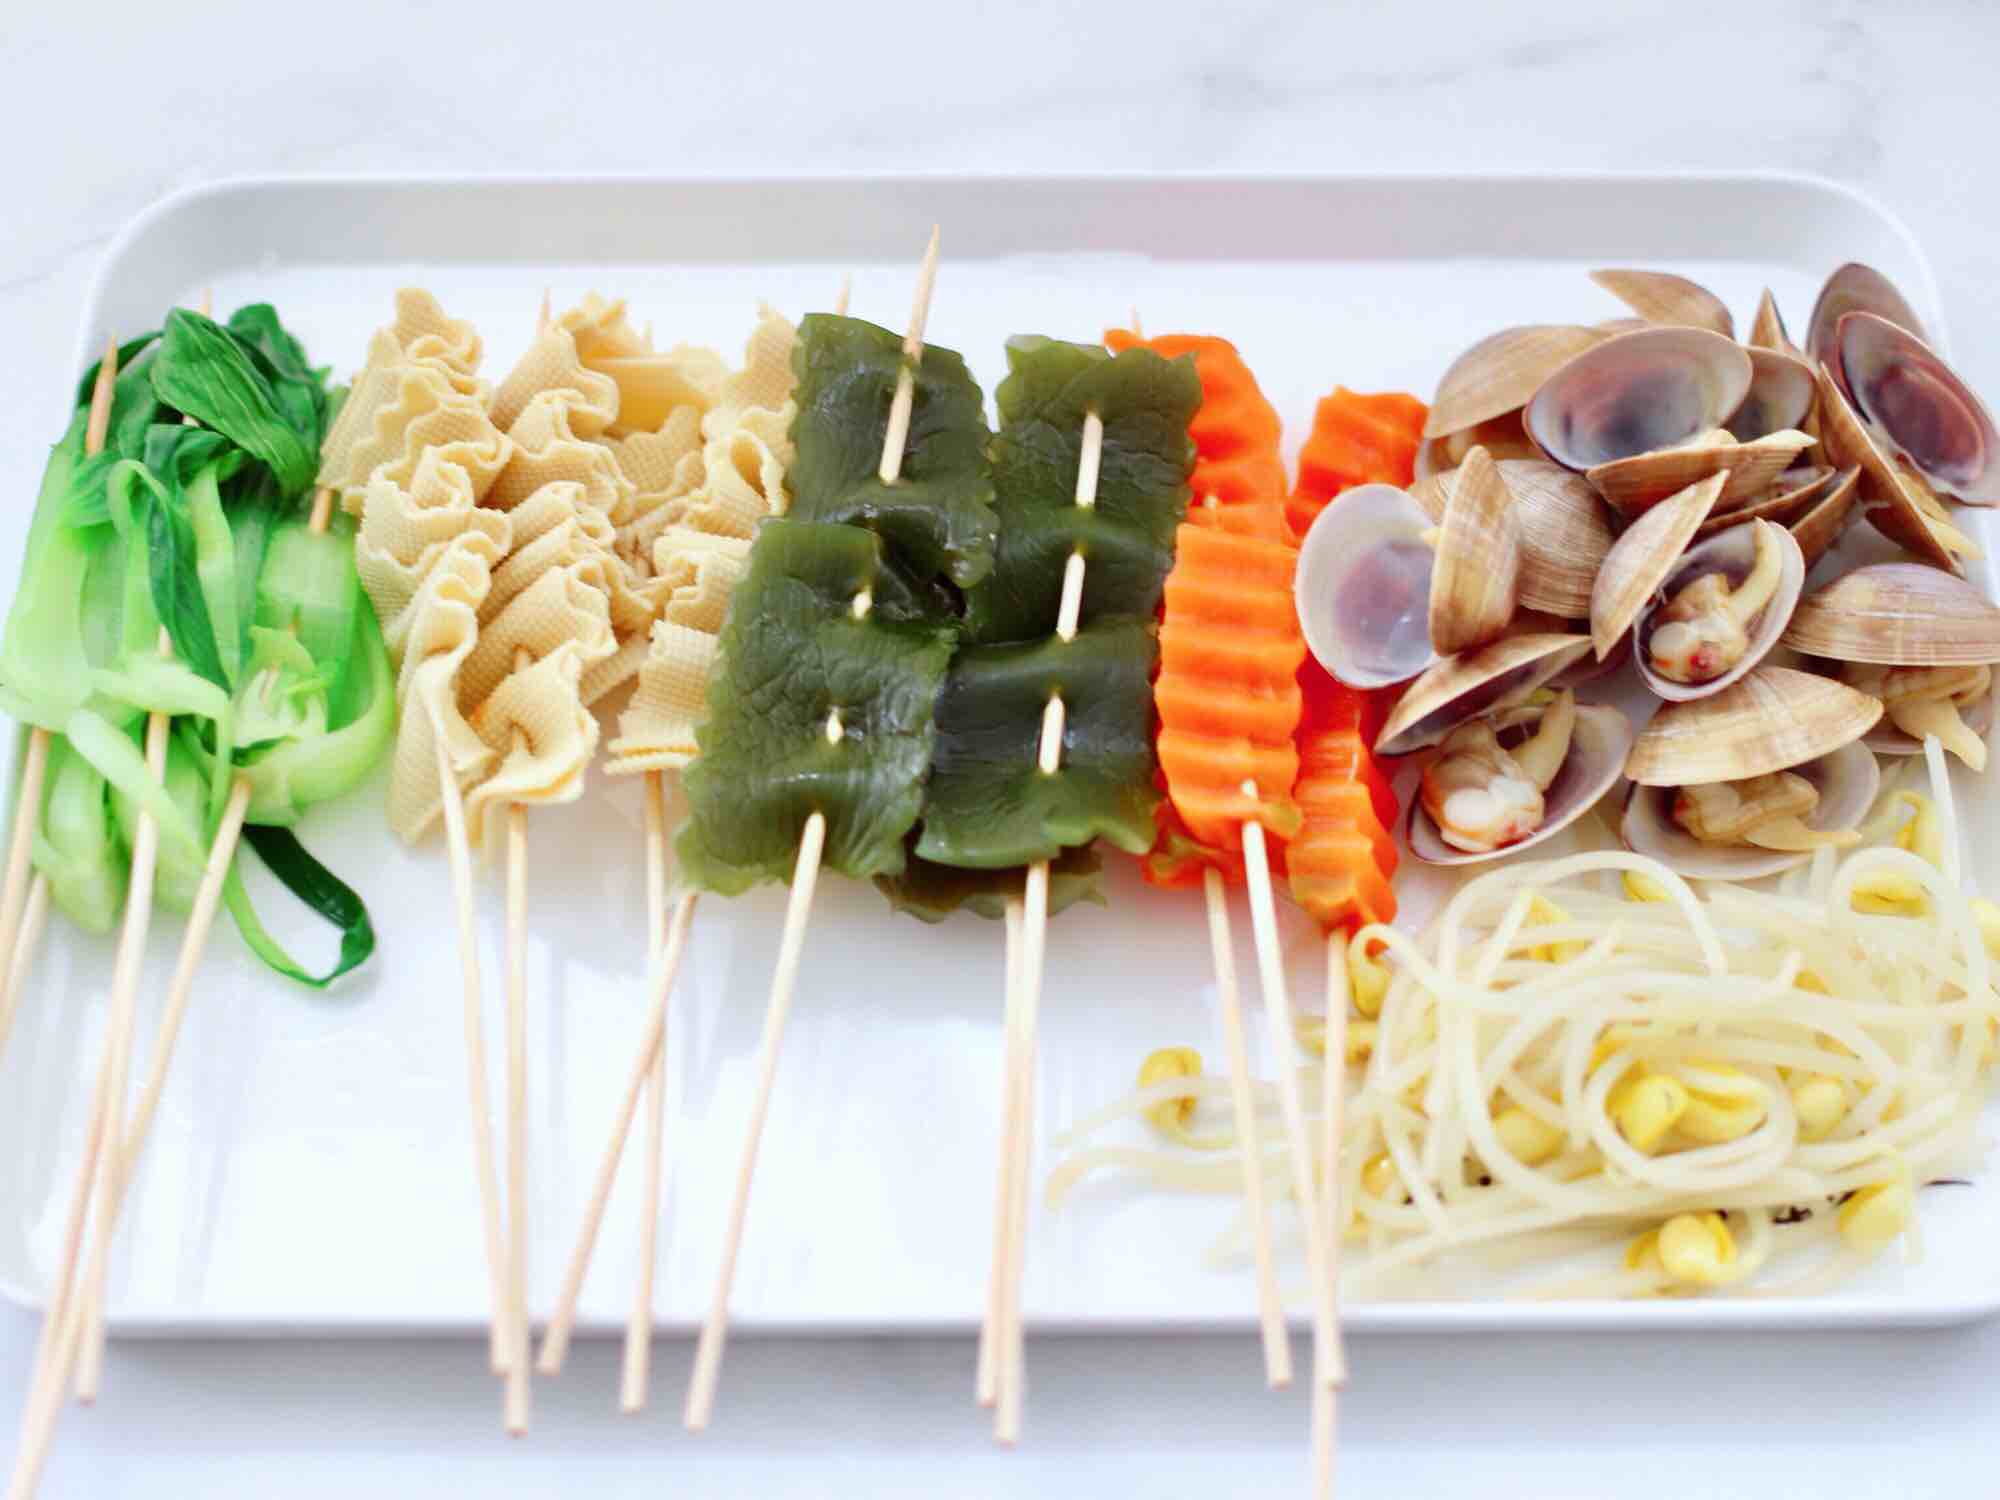 Seafood and Vegetable Cold Skewers recipe